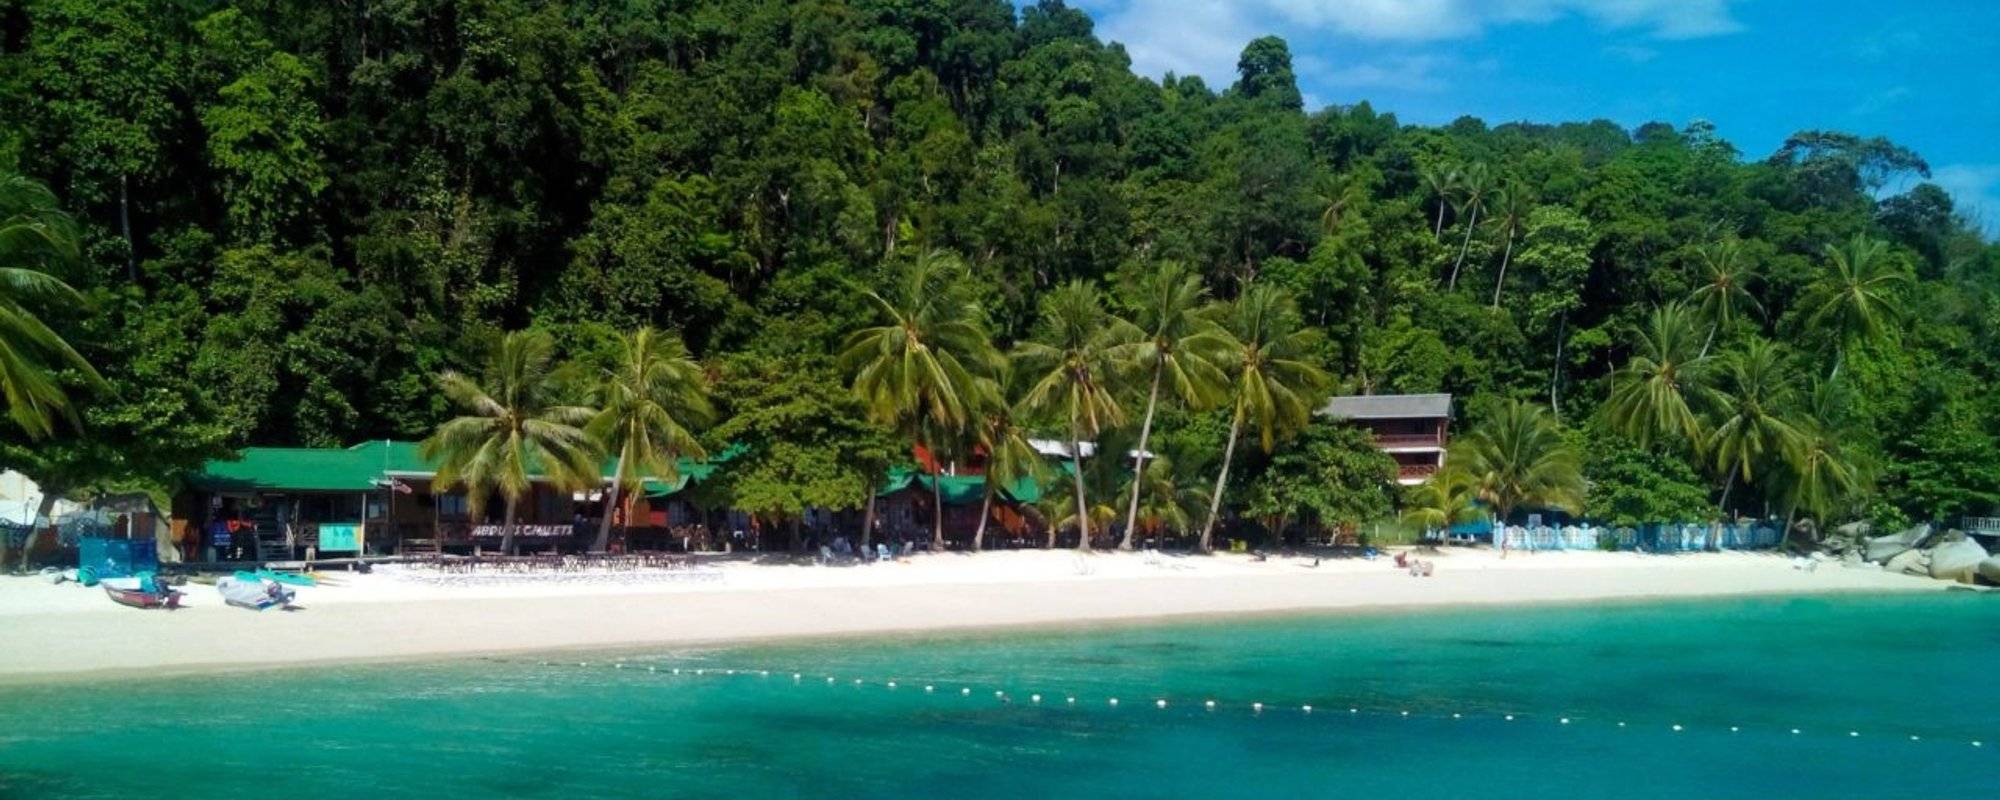 Malaysia: Perhentian Besar is the place to be